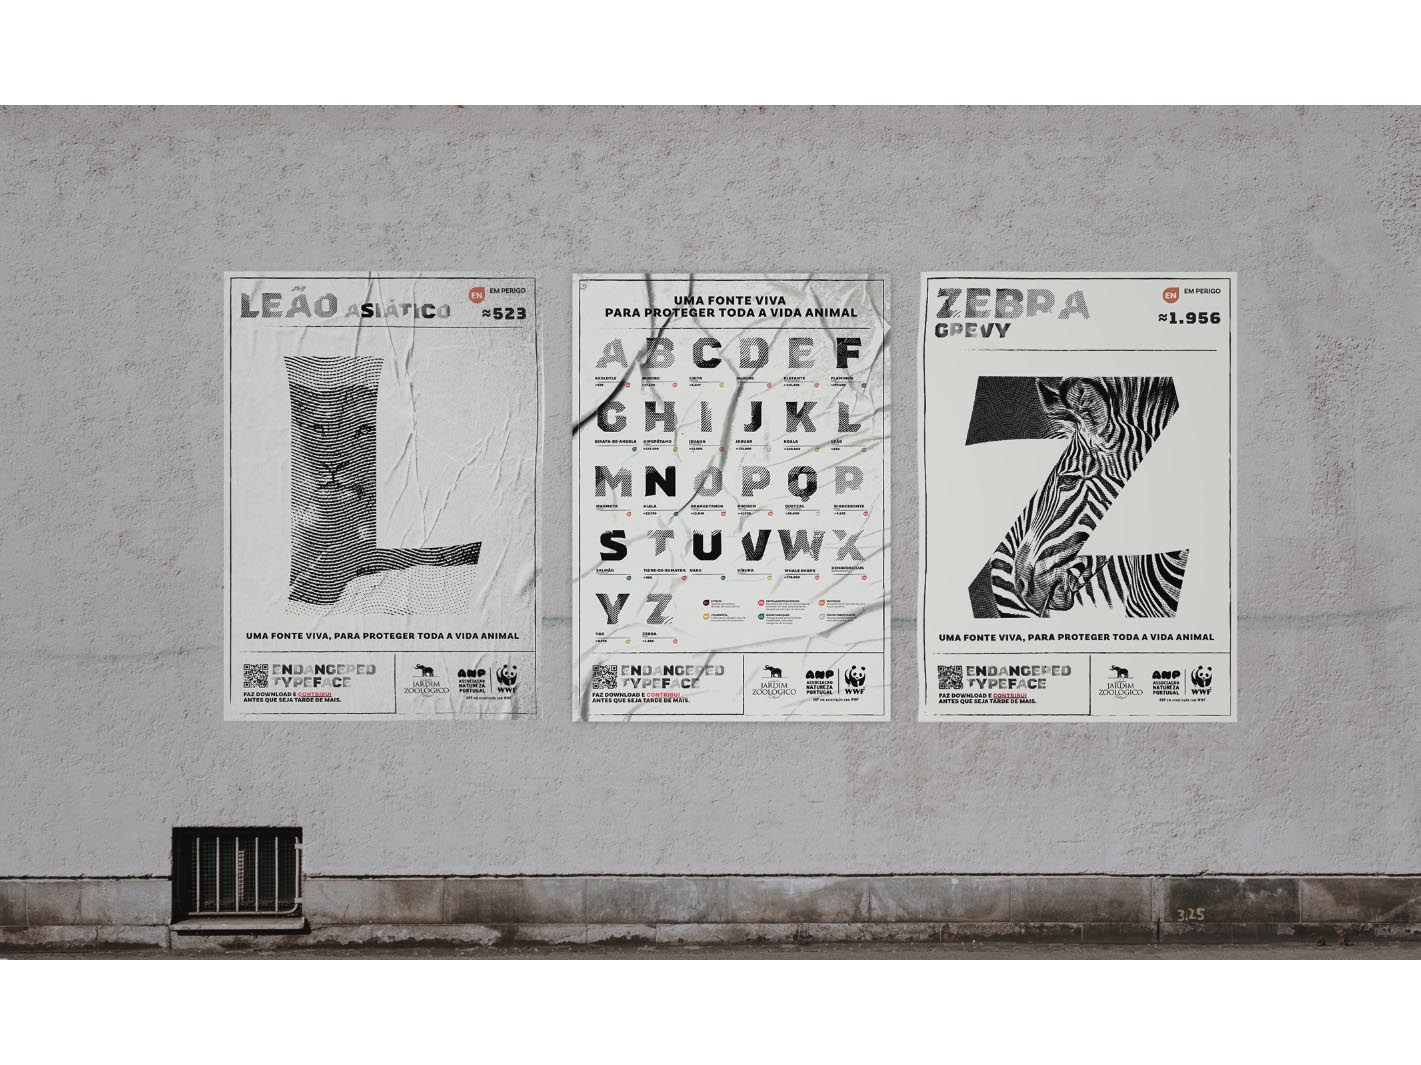 BAR Ogilvy creates The Endangered Typeface, a living font against the 6th mass extinction